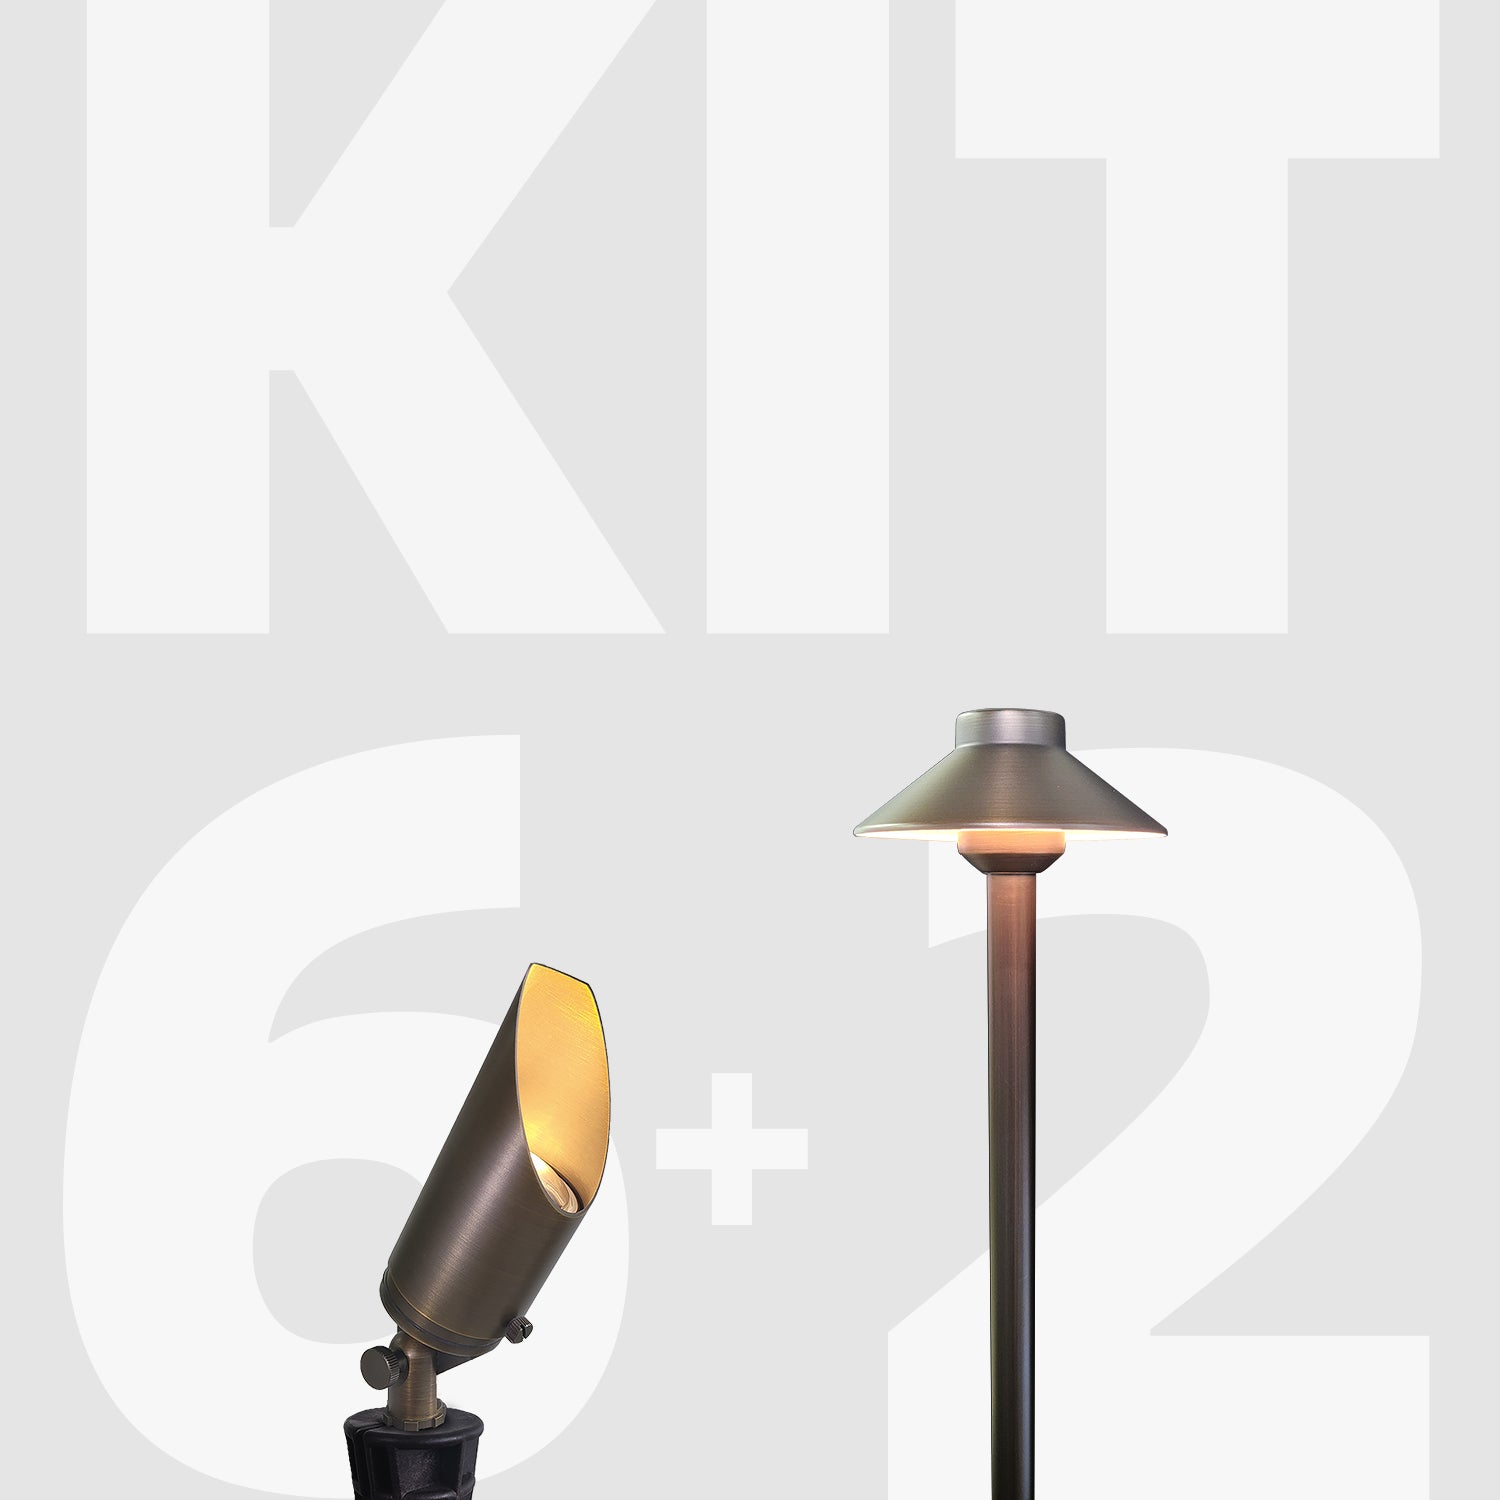 Solid Brass 12V LED Landscape Lighting Kit, featuring an angled path light and a directional spotlight with KIT 6+2 overlay text.